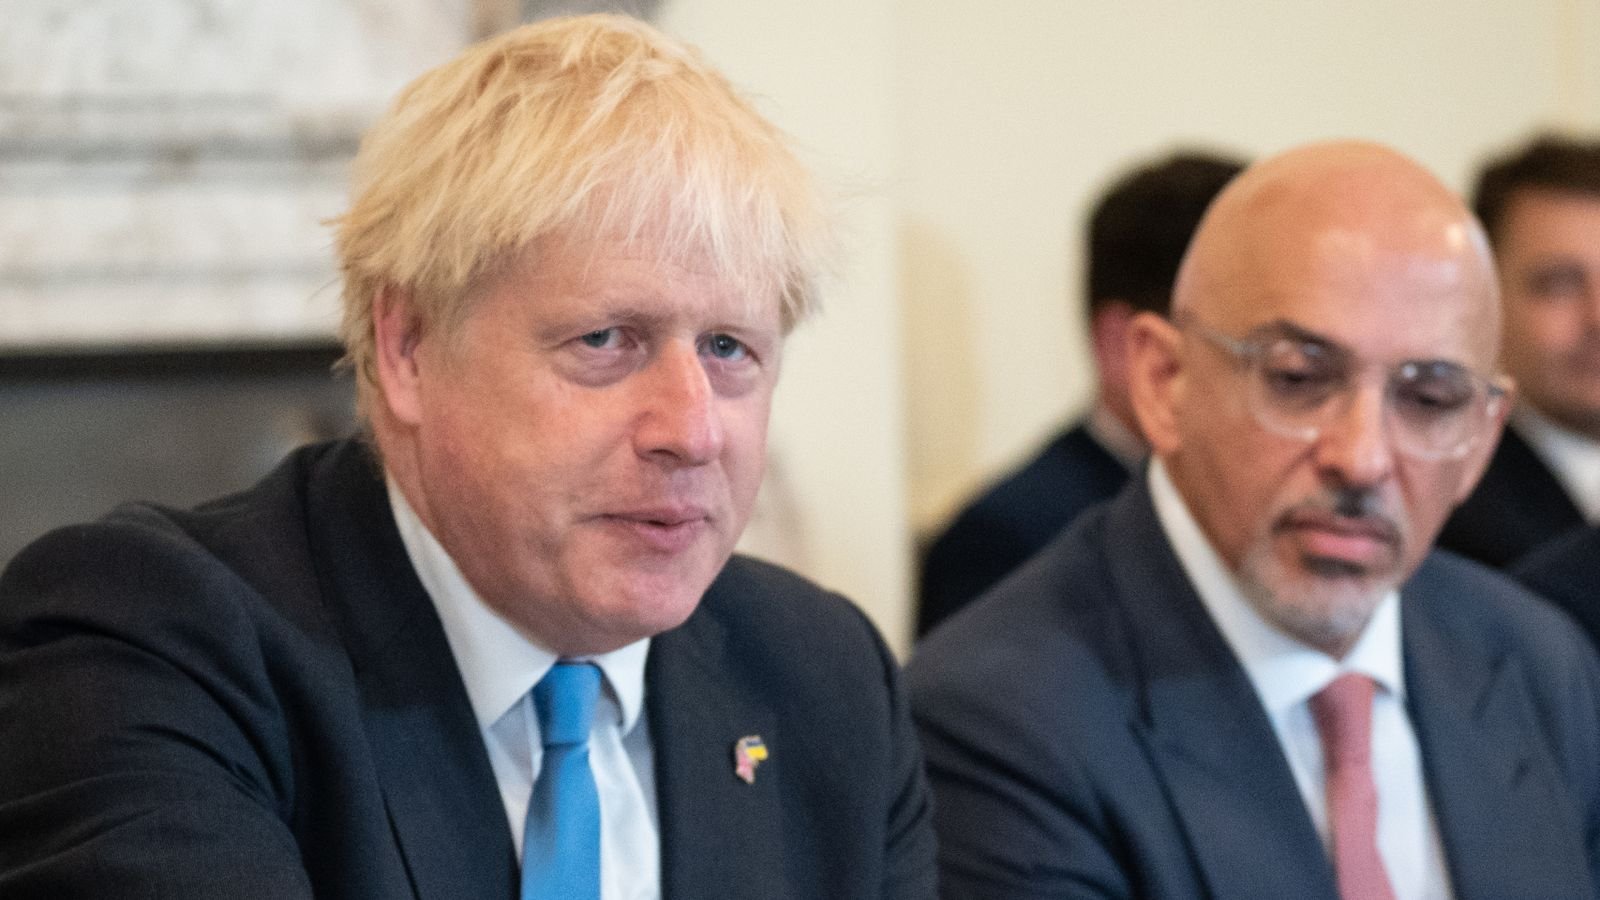 Boris Johnson will not intervene in cost of living crisis as that is 'for future prime minister'